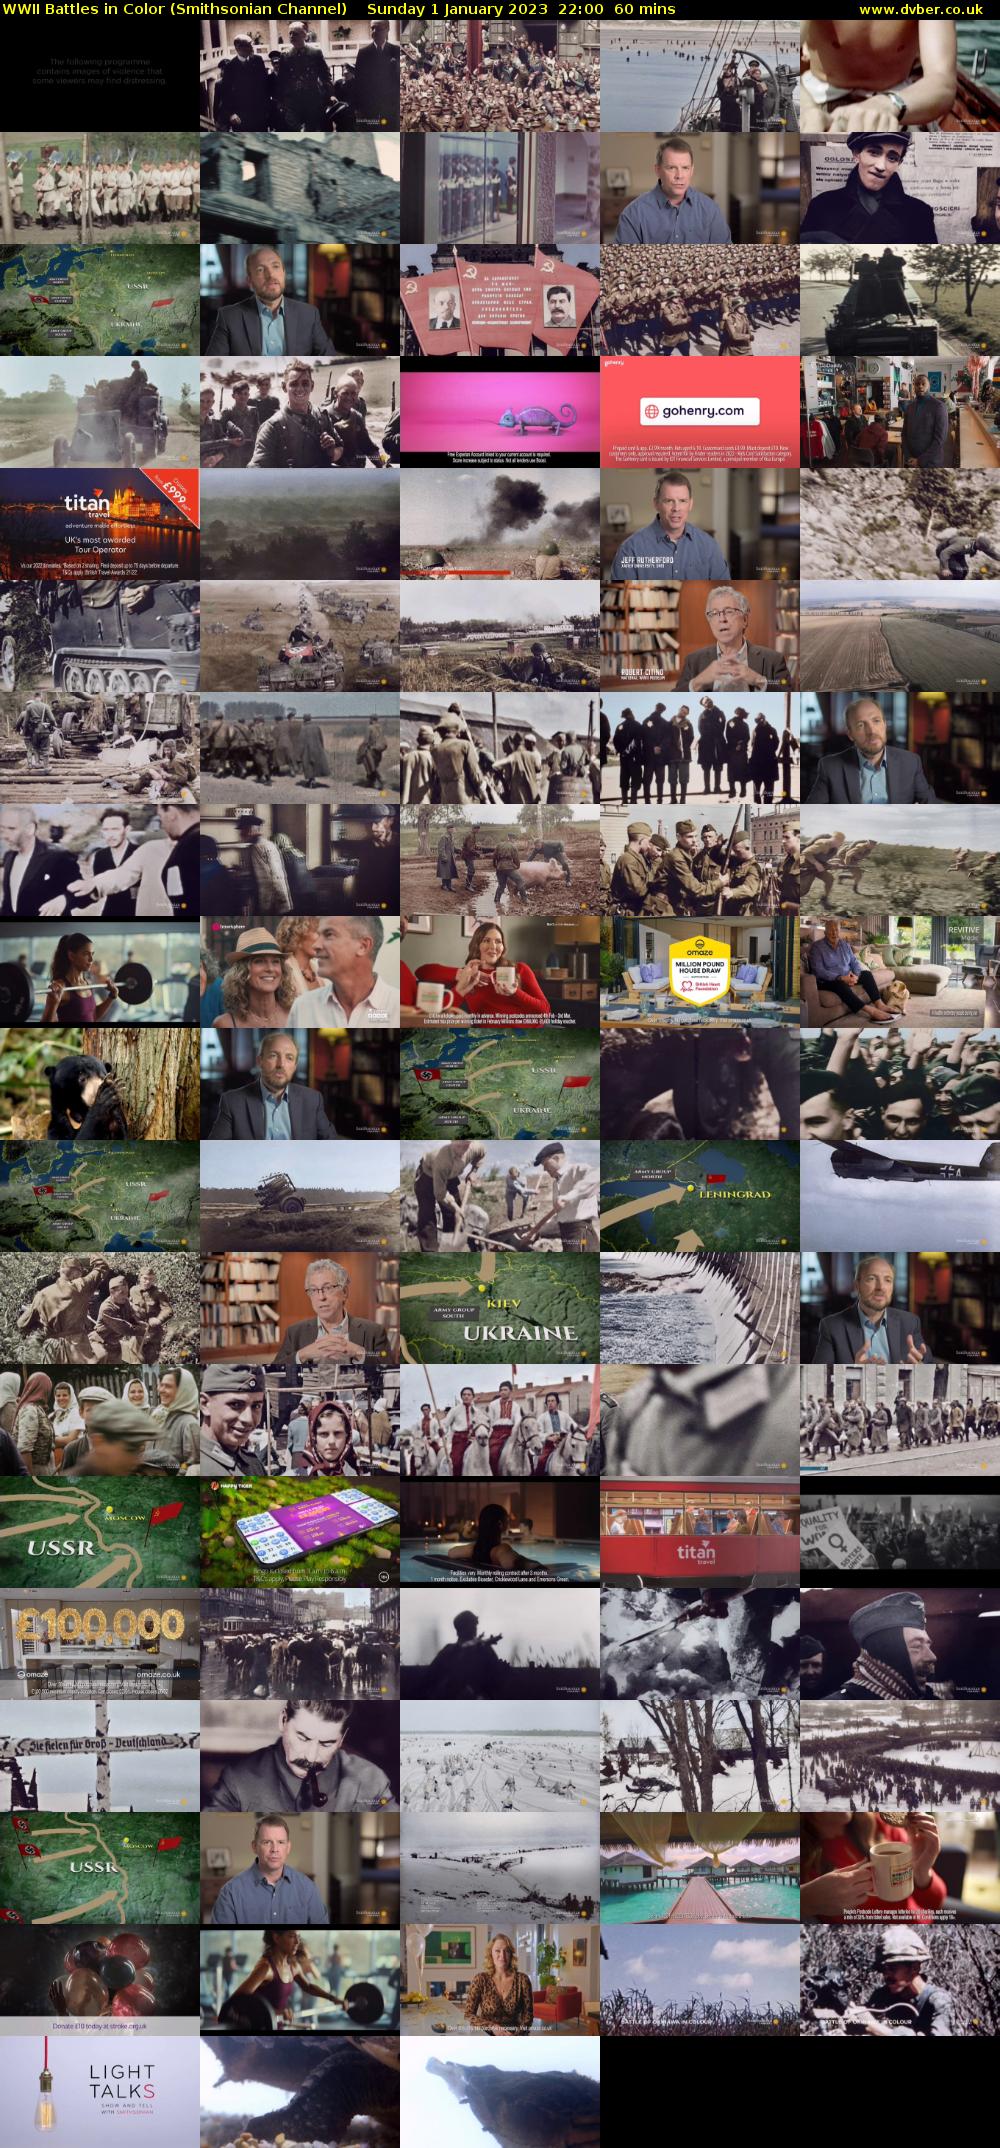 WWII Battles in Color (Smithsonian Channel) Sunday 1 January 2023 22:00 - 23:00